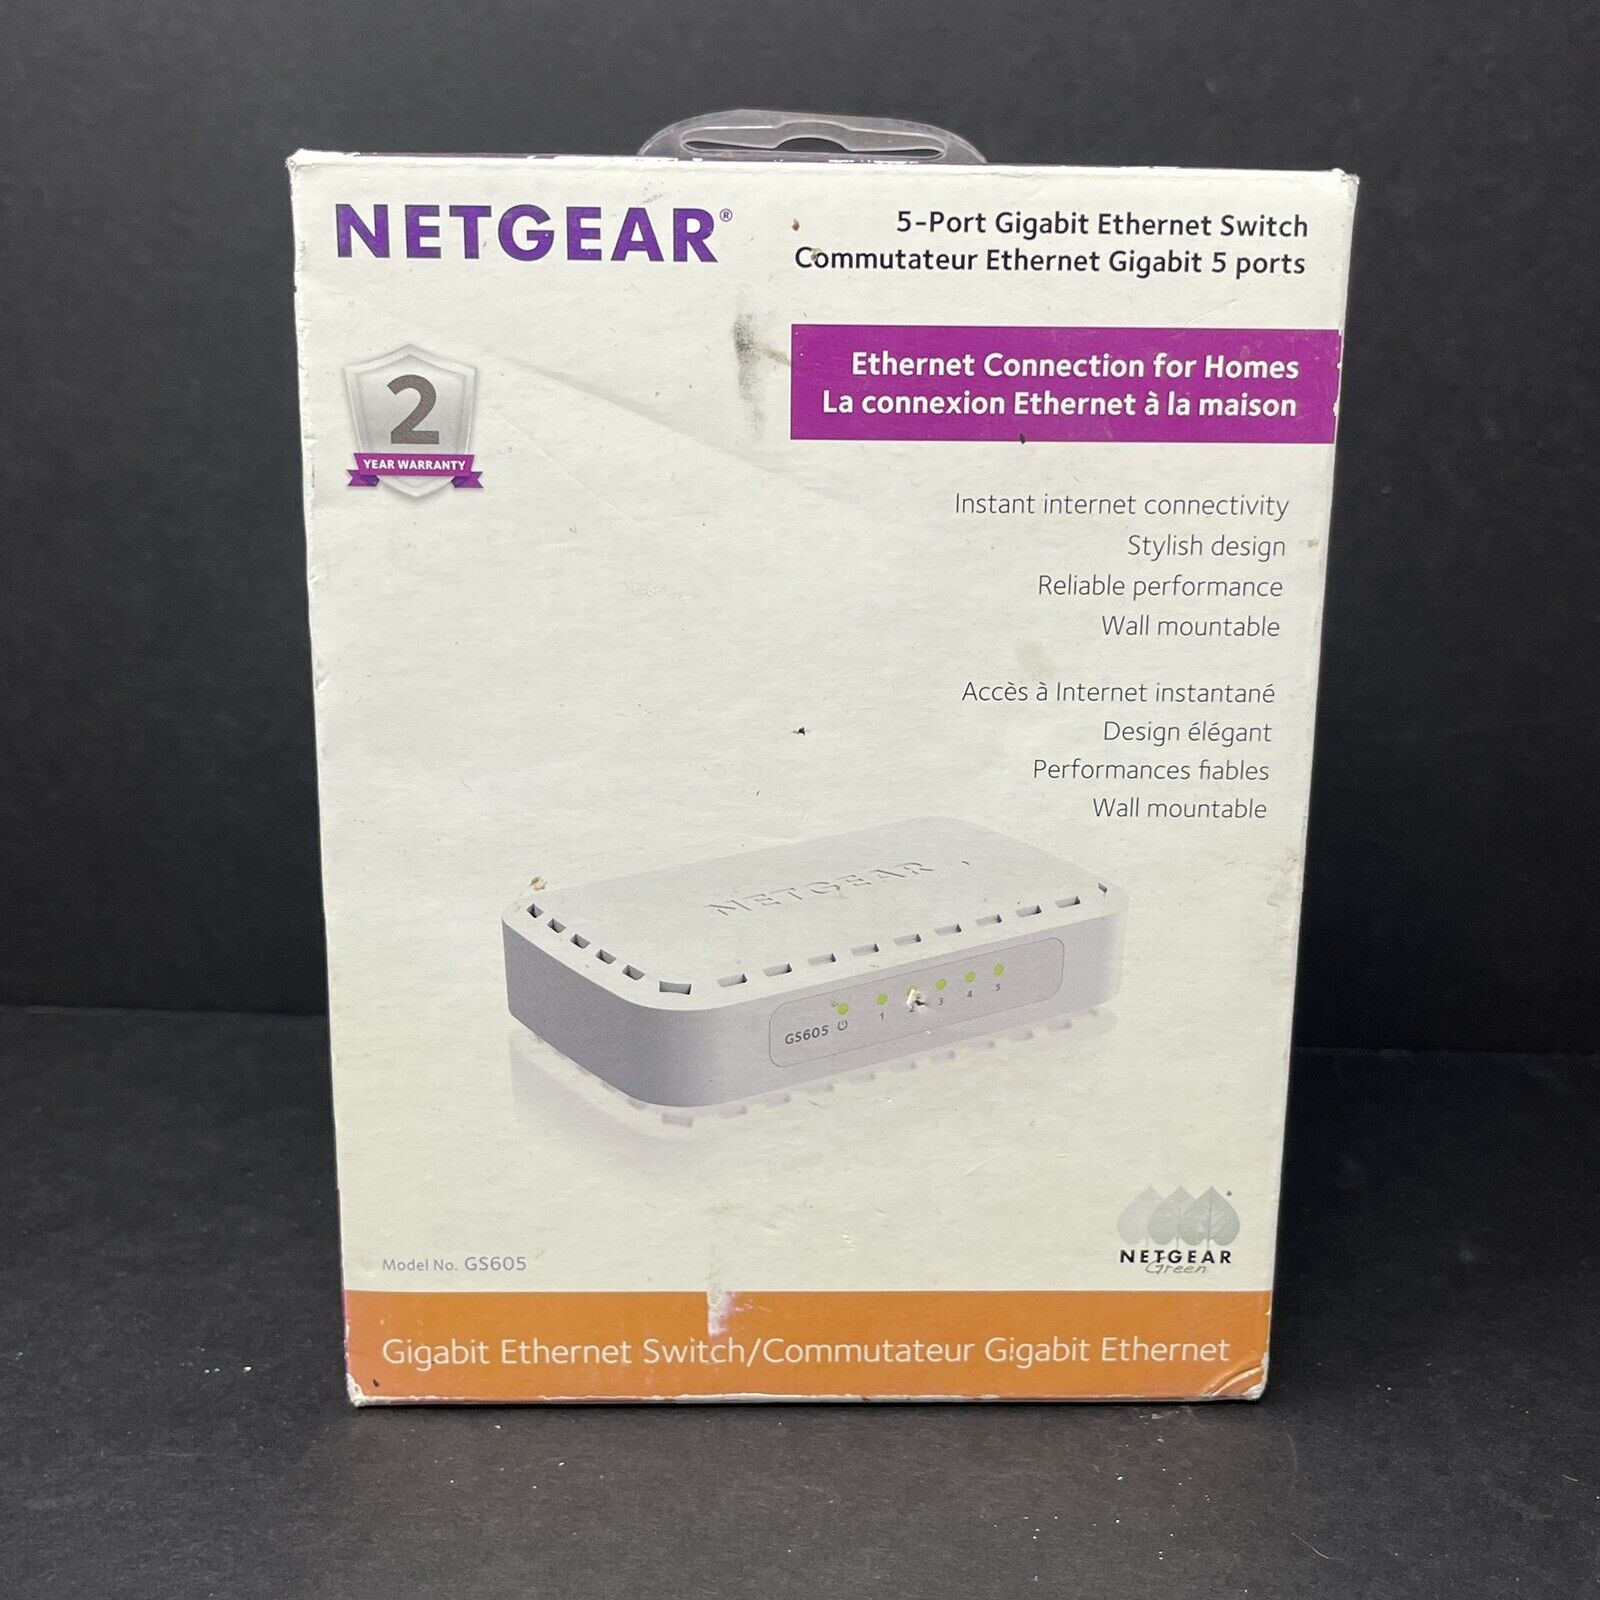 Netgear 5-Port Gigabit Ethernet Switch GS605V5 with Power Cable